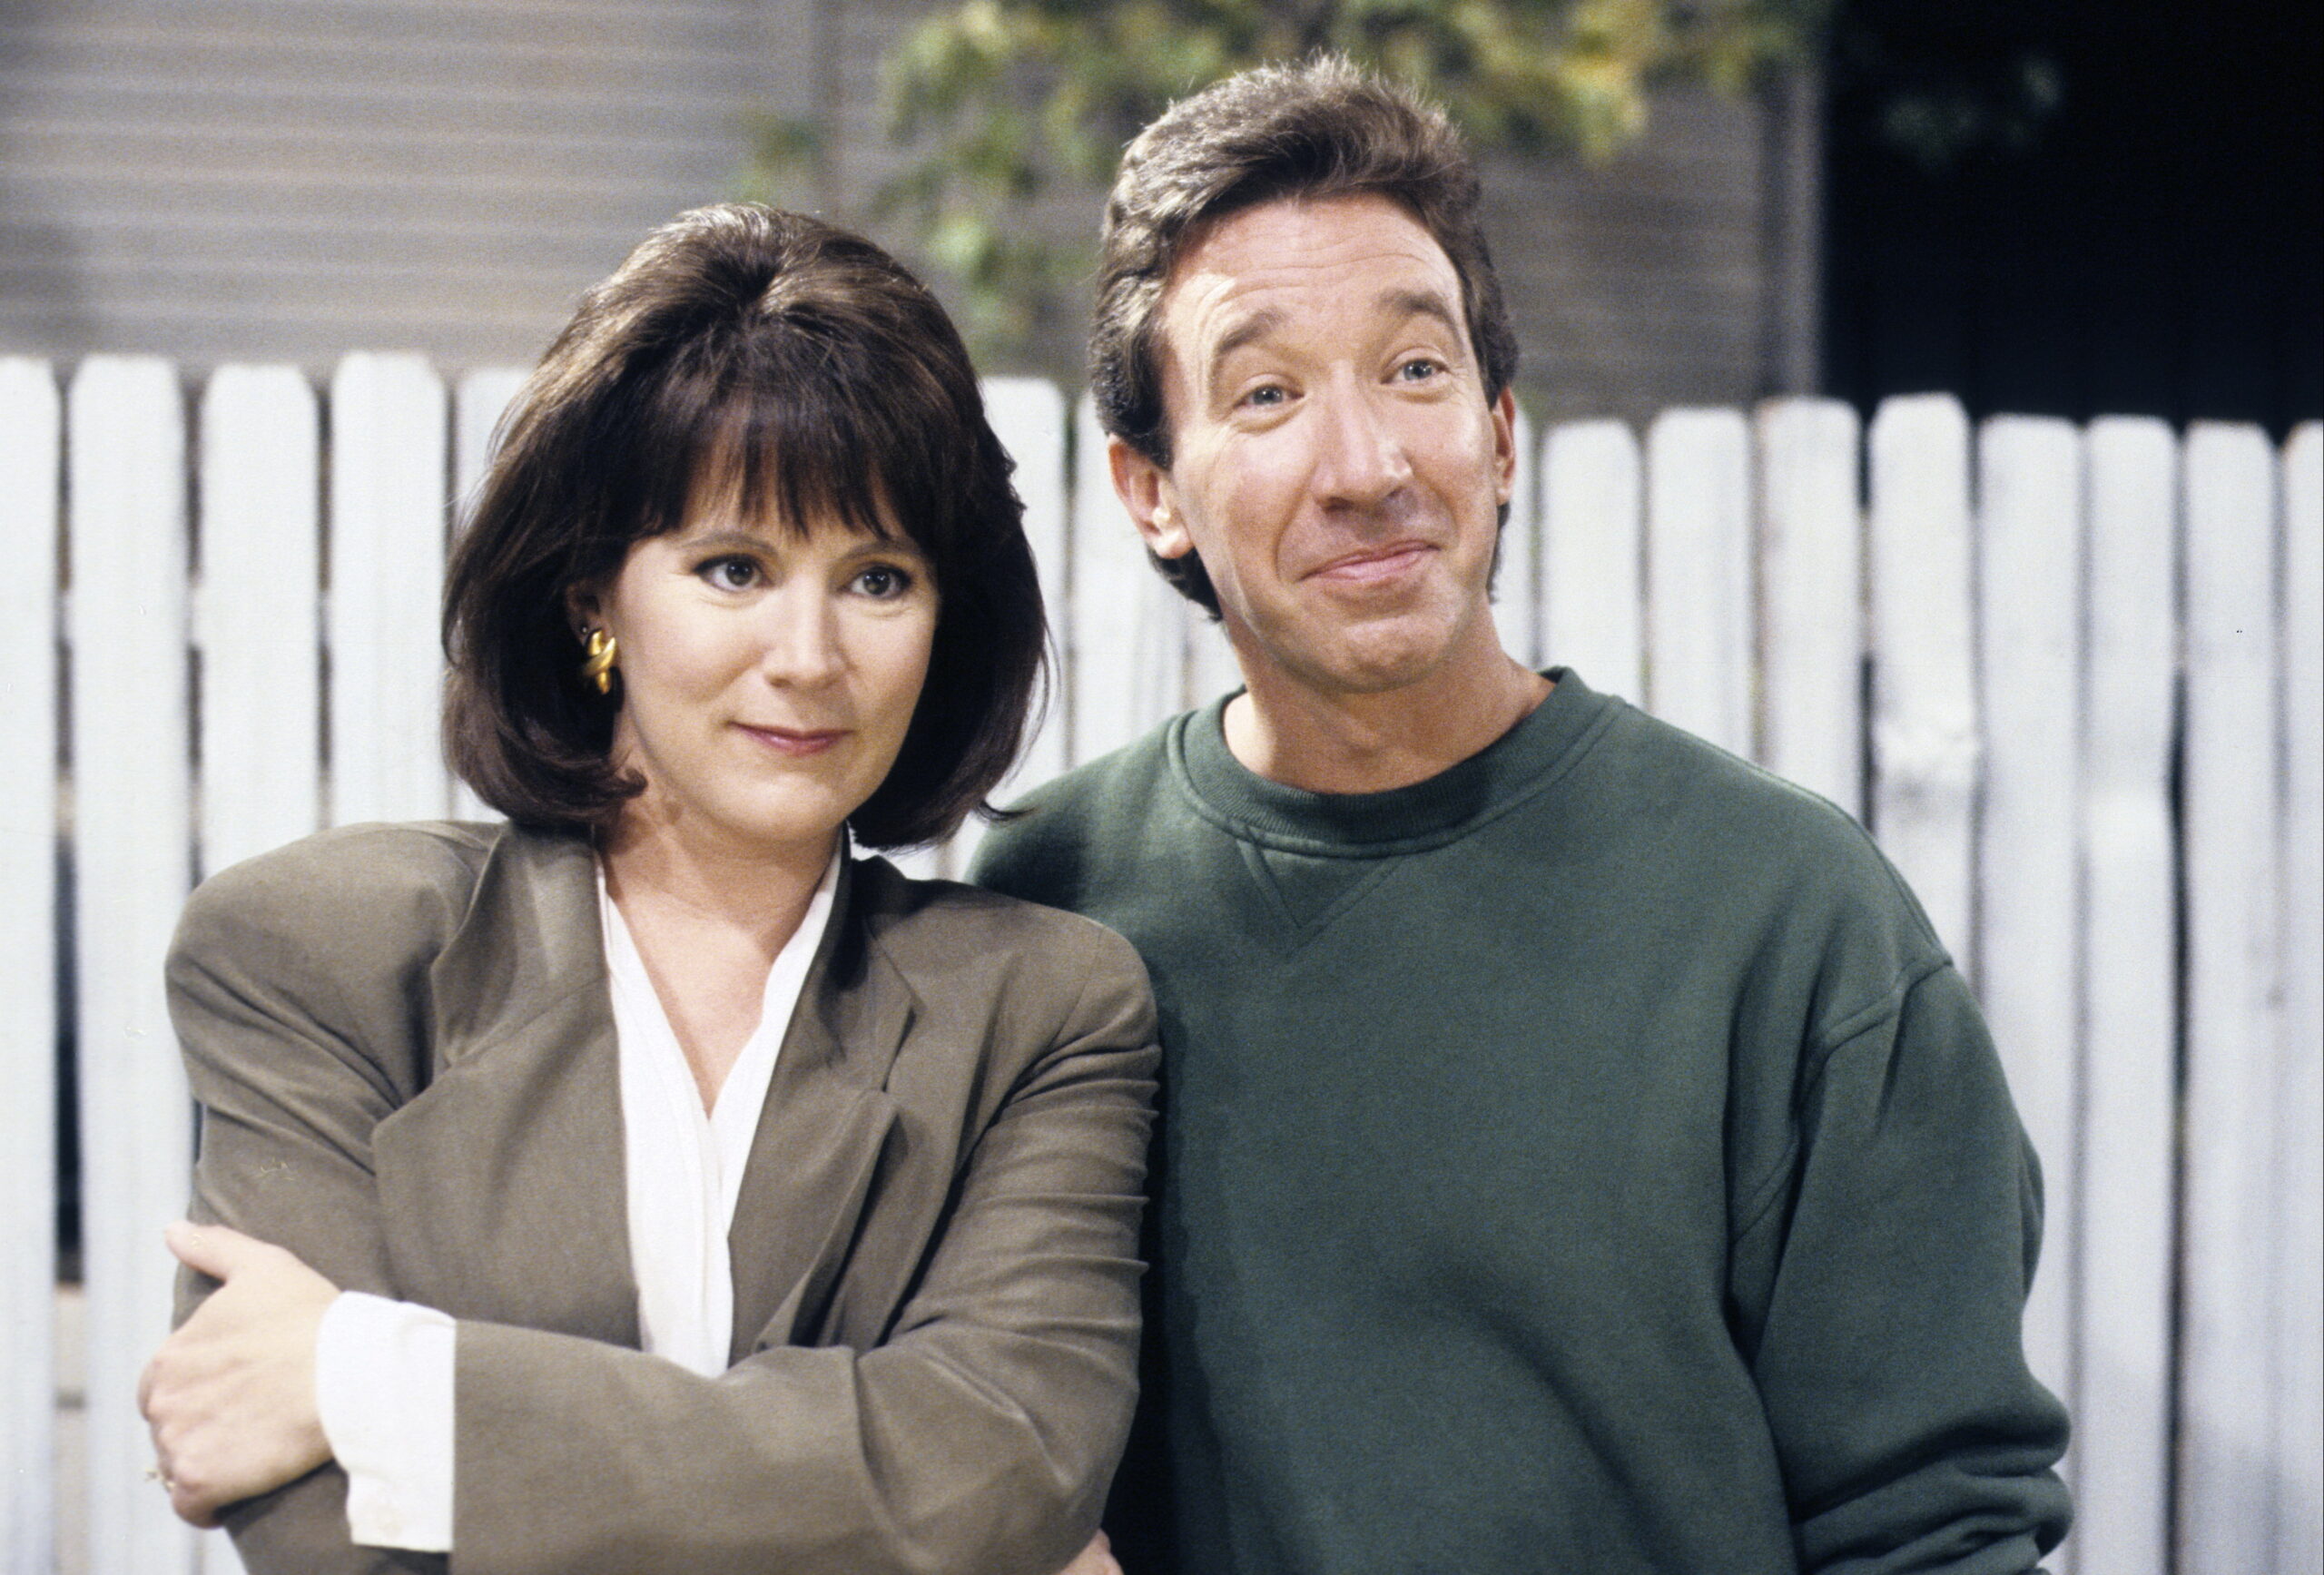 Patricia Richardson and Tim Allen in "Home Improvement," September 17, 1991 | Source: Getty Images